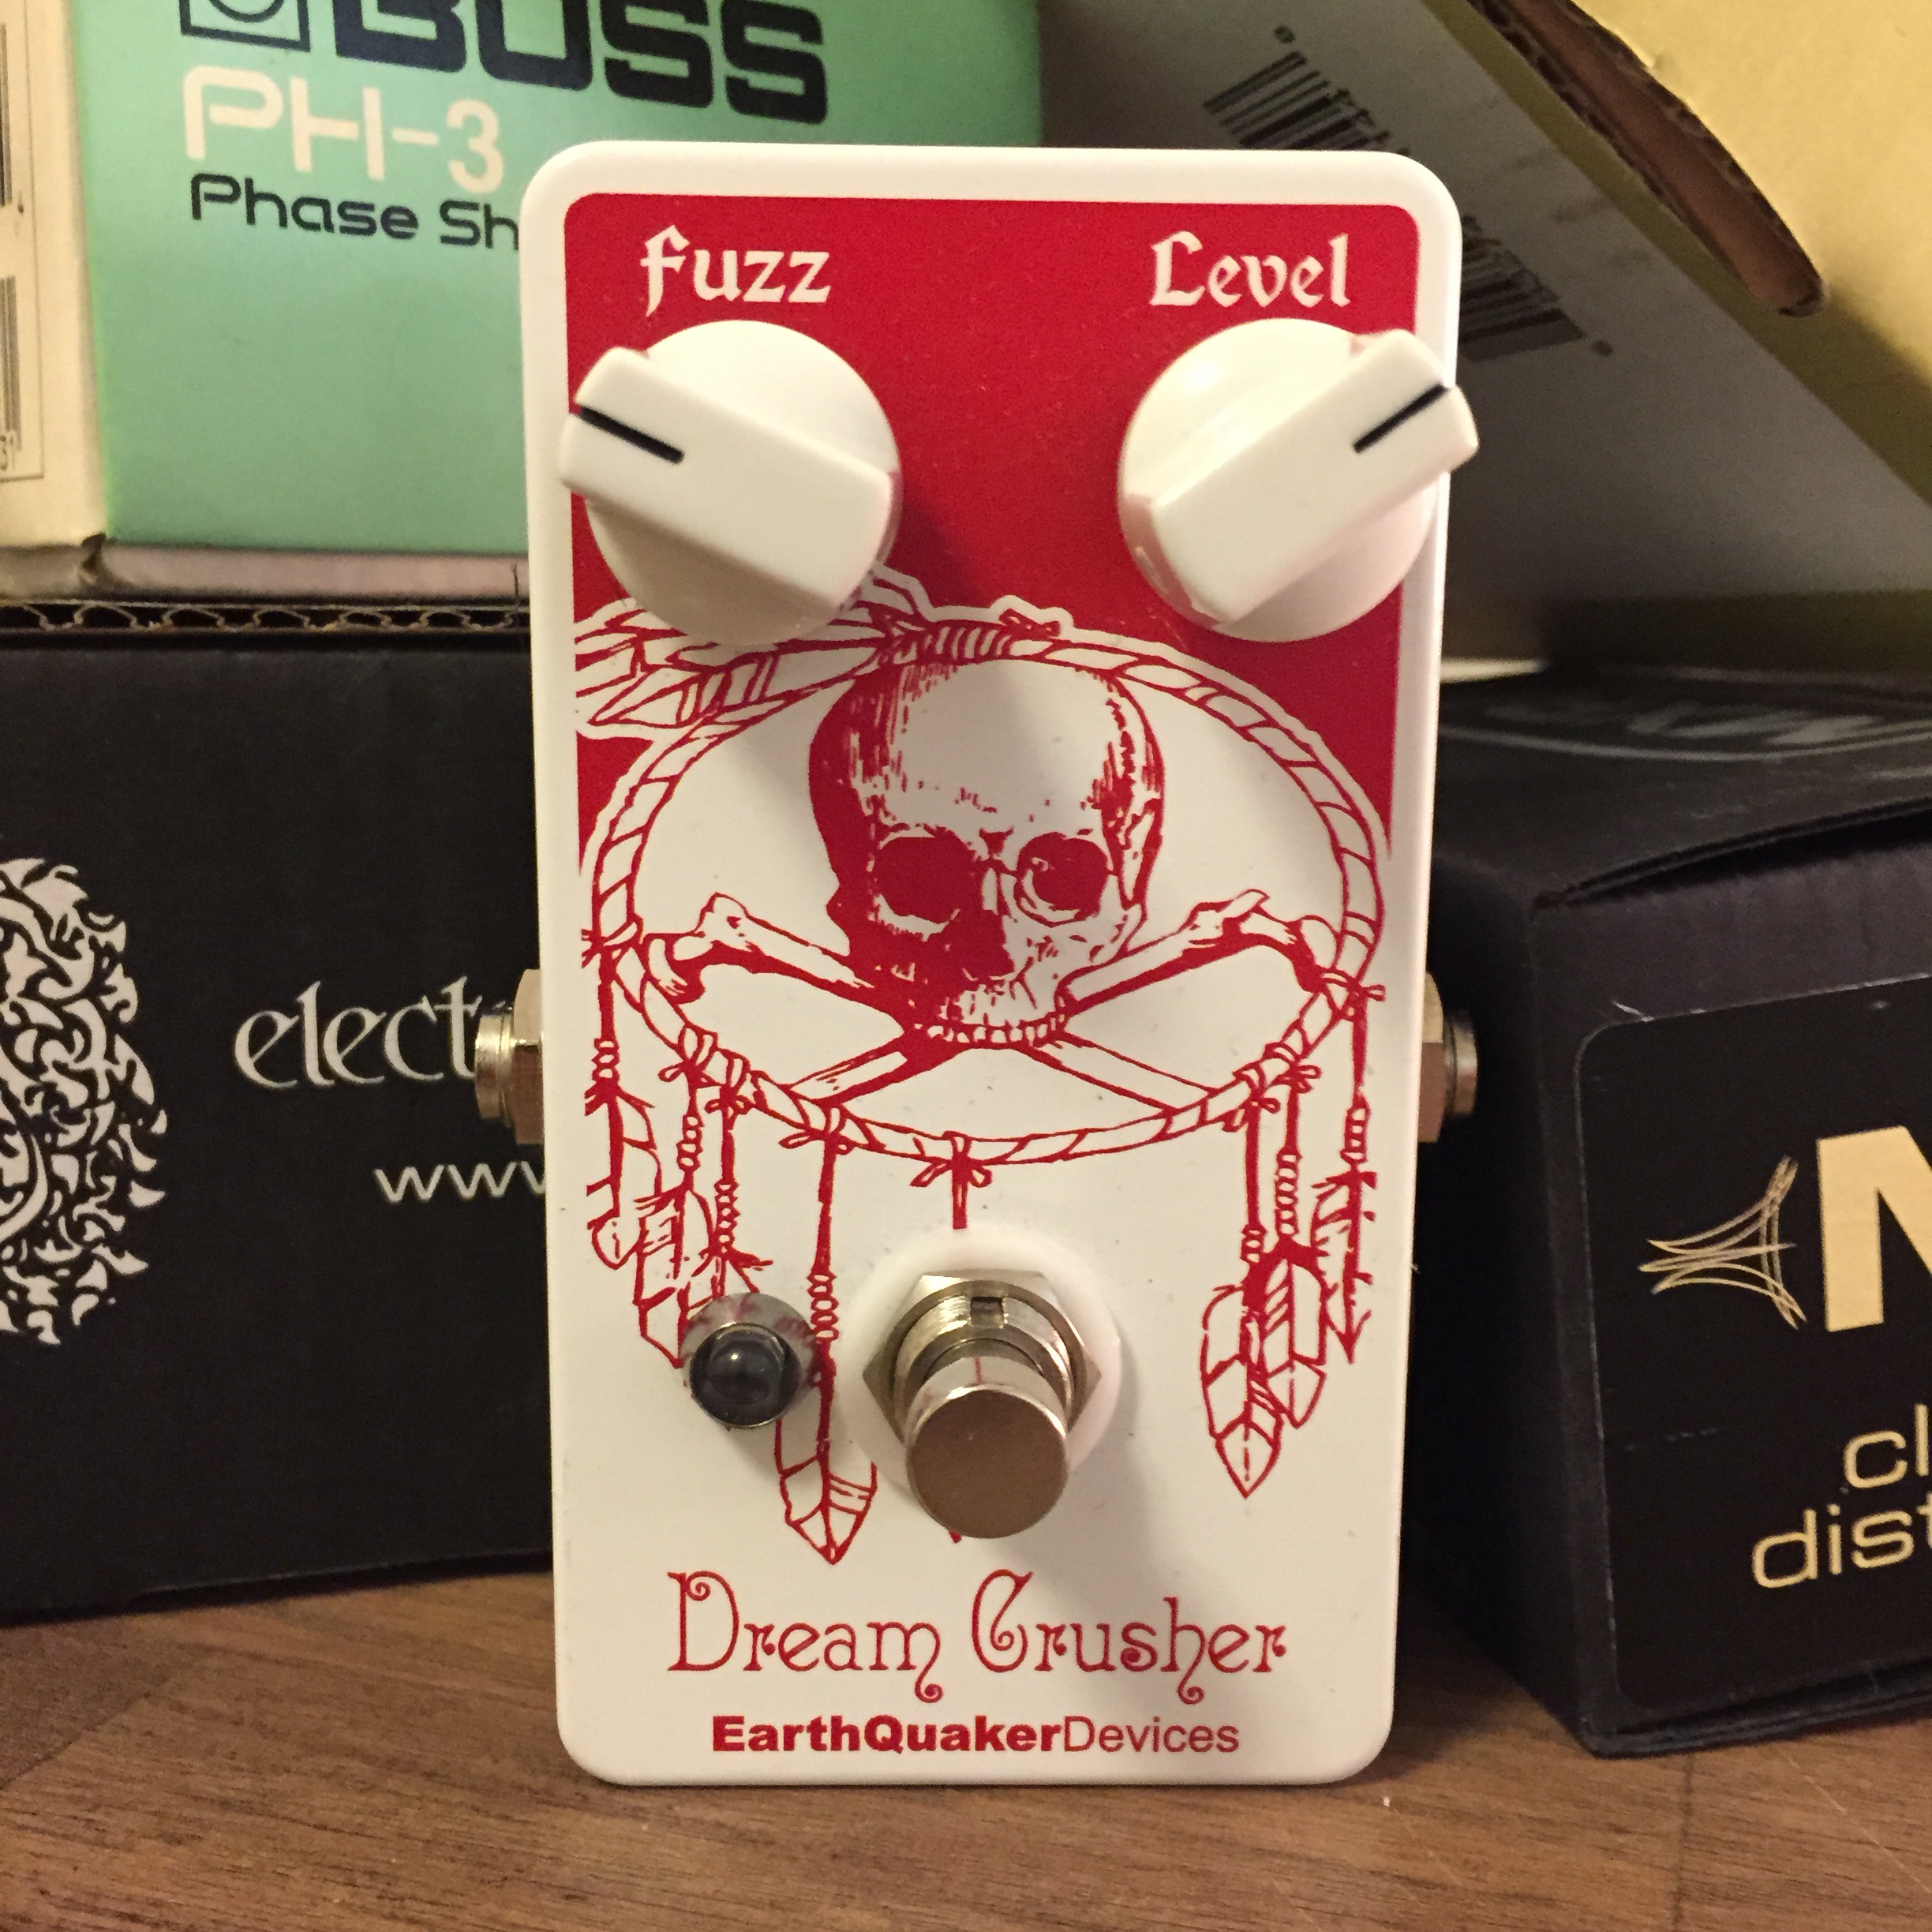 Because you didn't read the manual…. EarthQuaker Devices Dream Crusher Fuzz